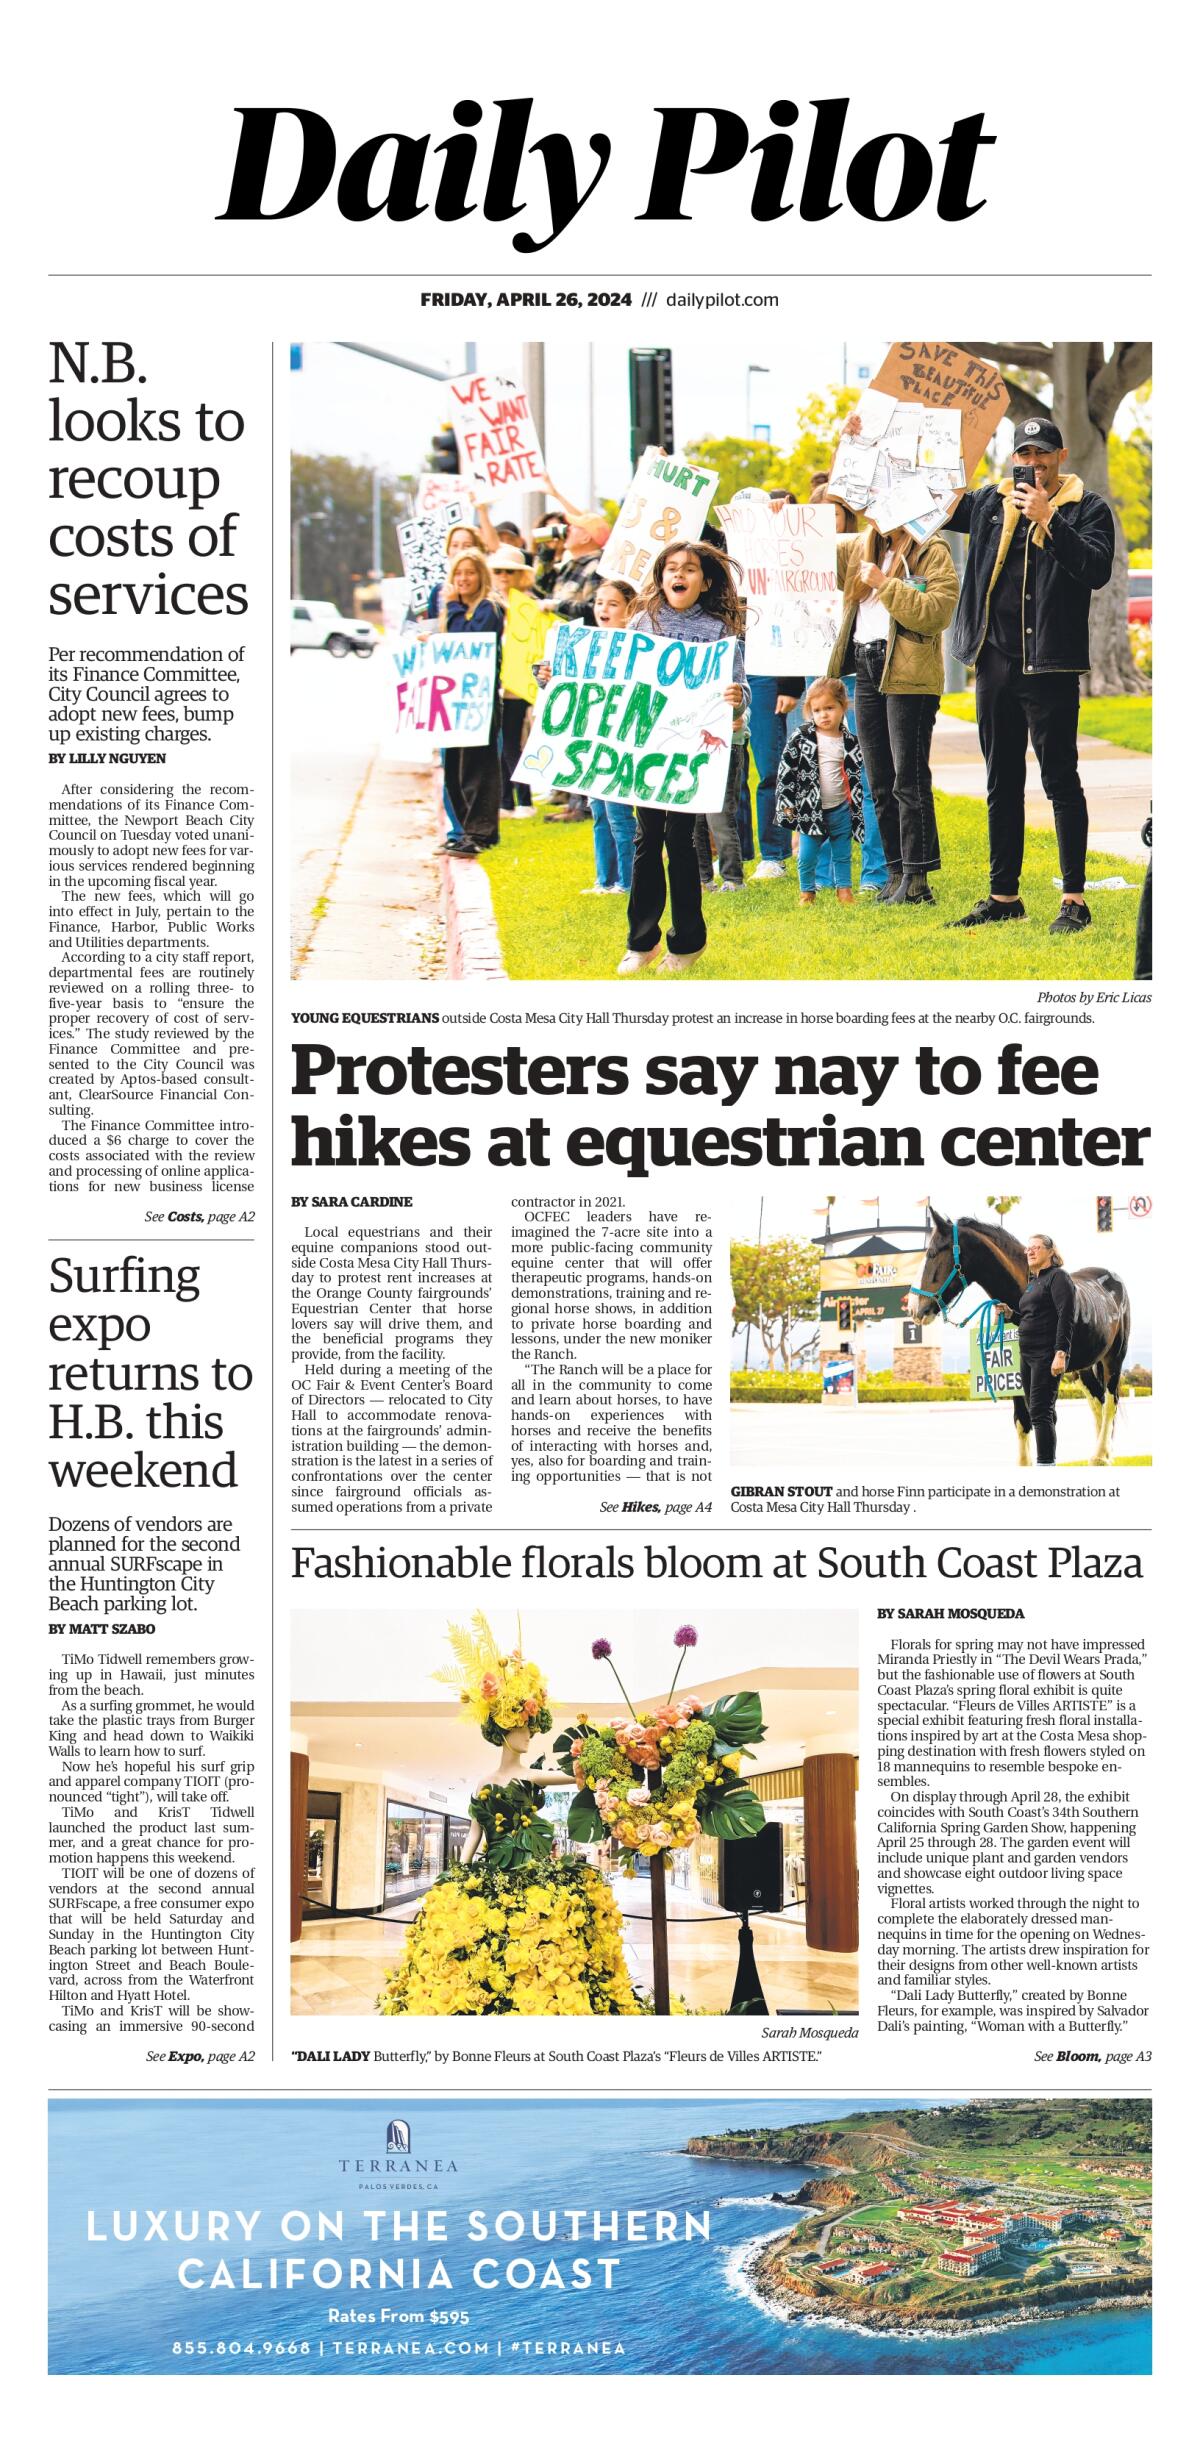 Front page of the Daily Pilot e-newspaper for Friday, April 26, 2024.